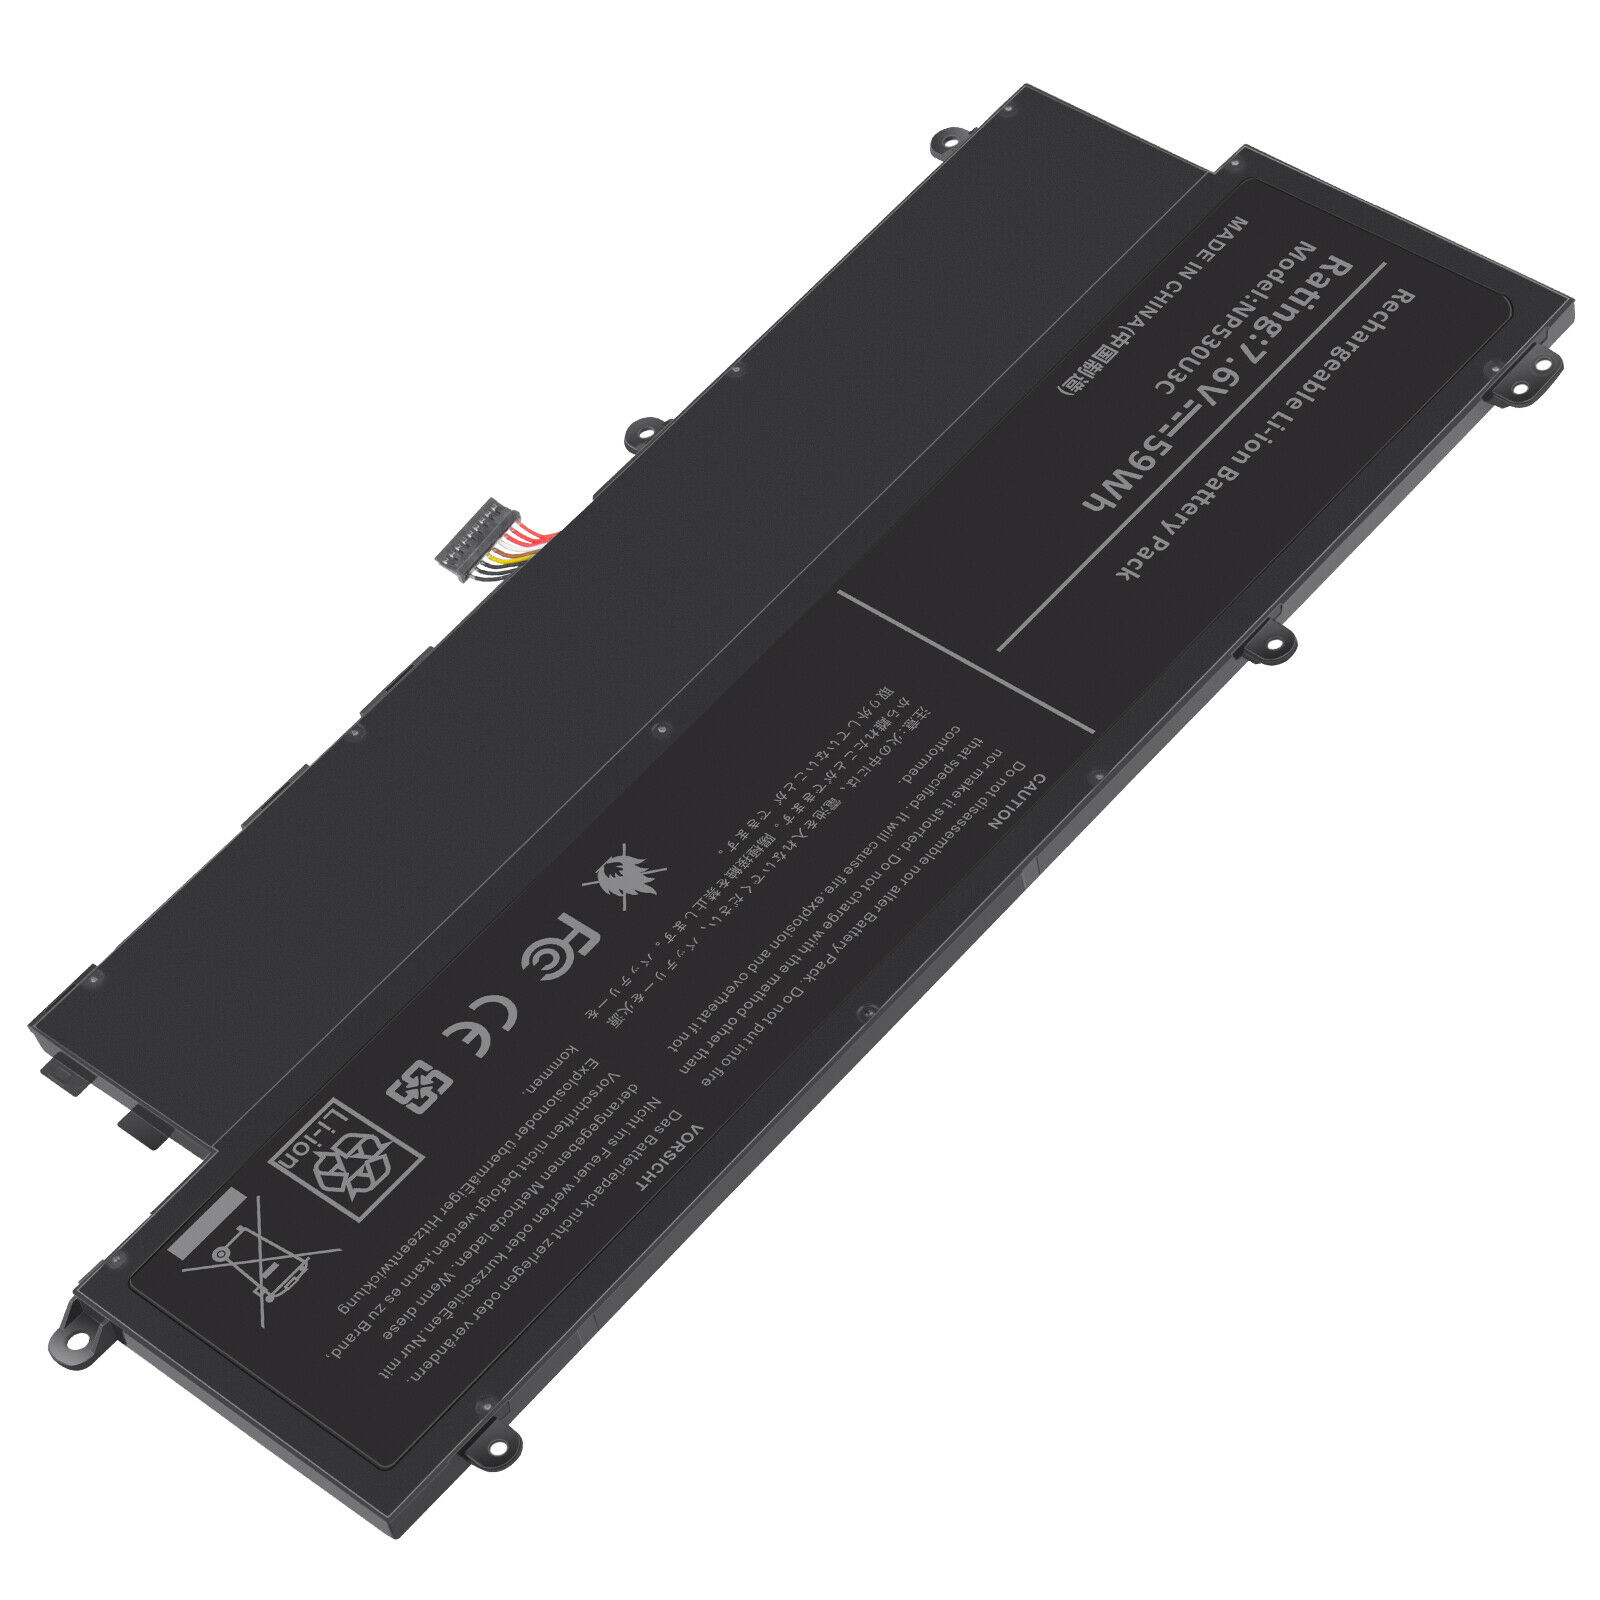 Samsung NP530U4B-A01US Replacement Battery 1